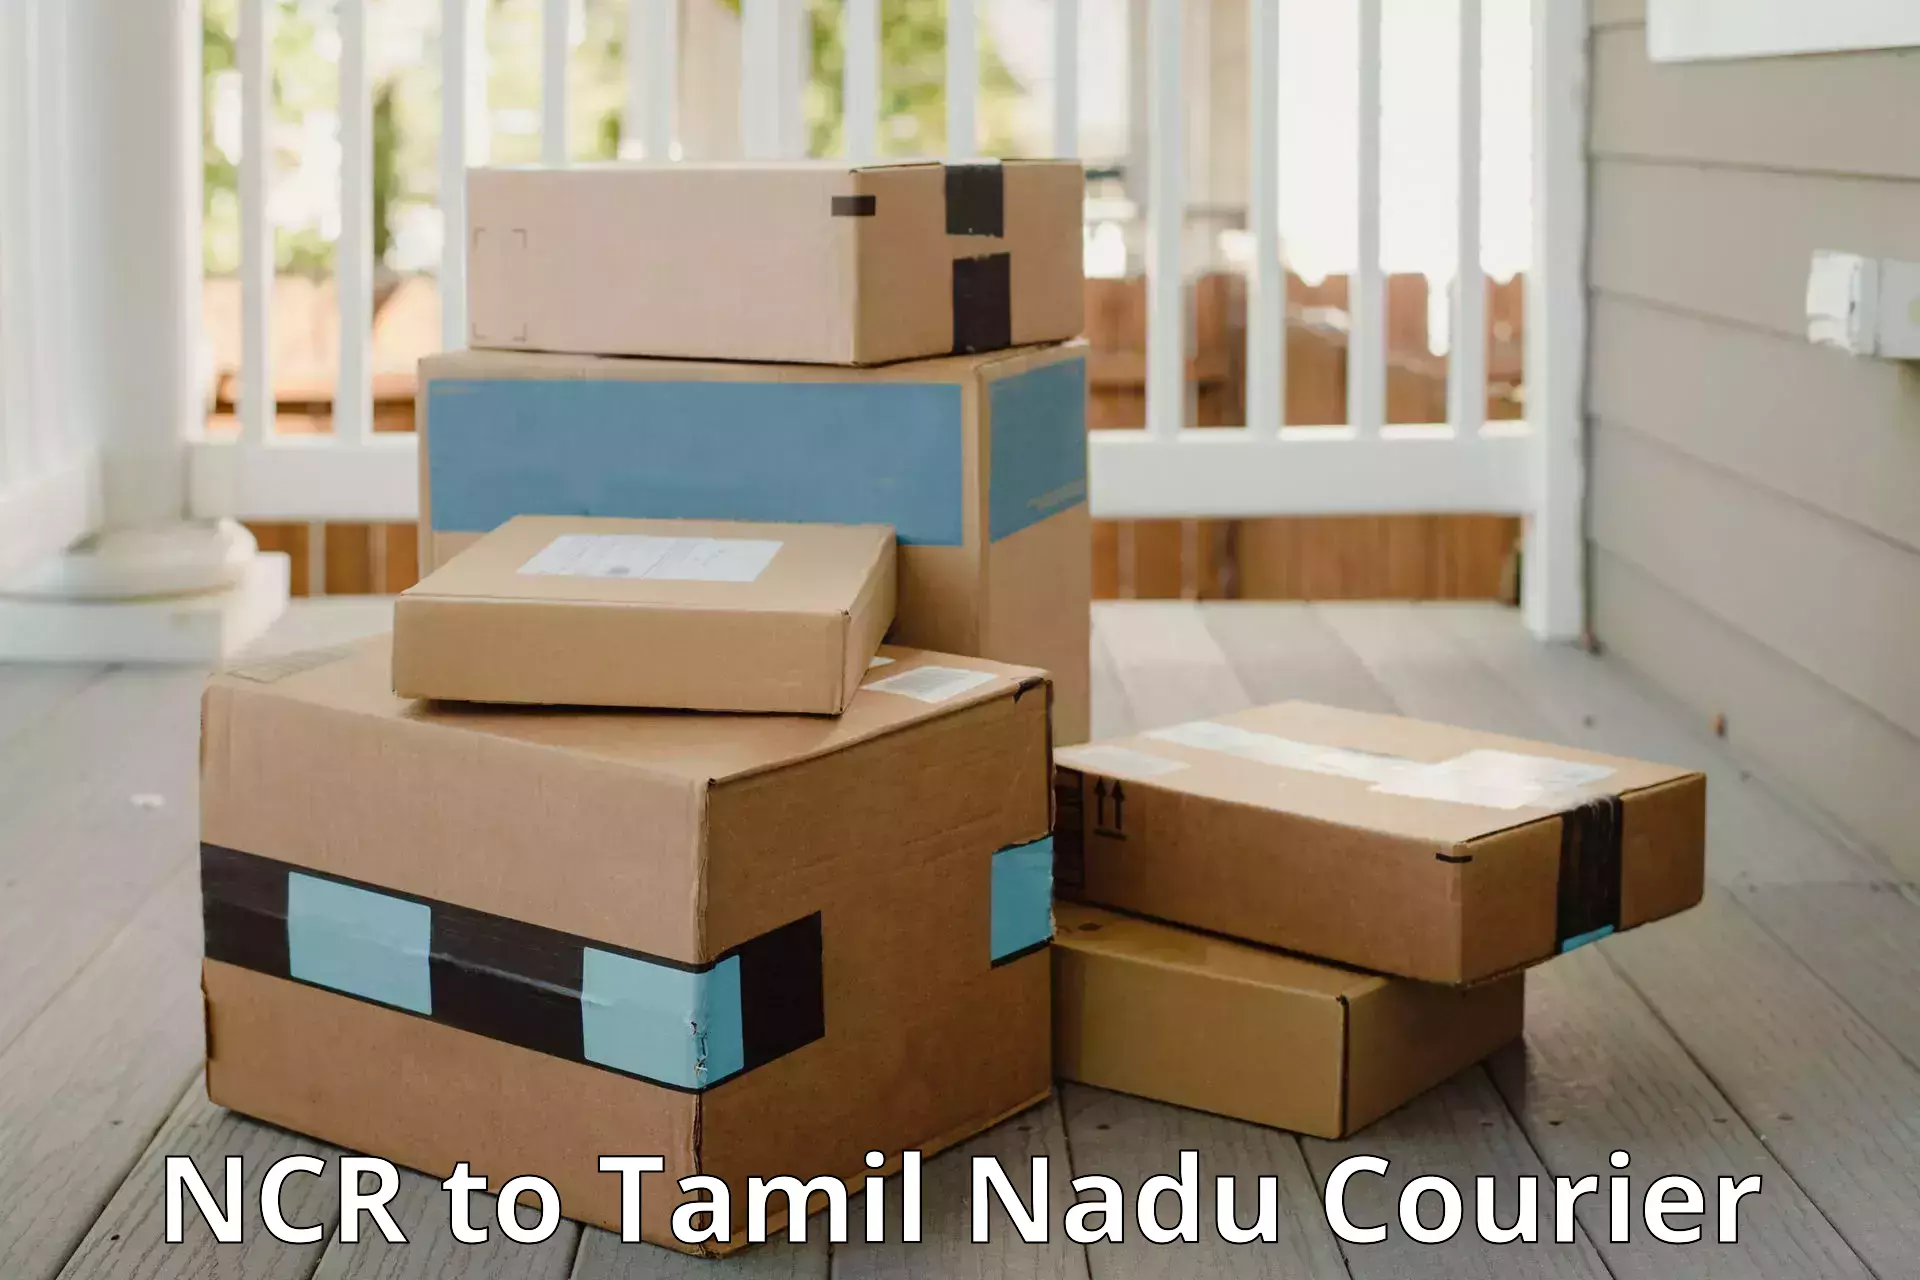 Express luggage delivery NCR to Tamil Nadu